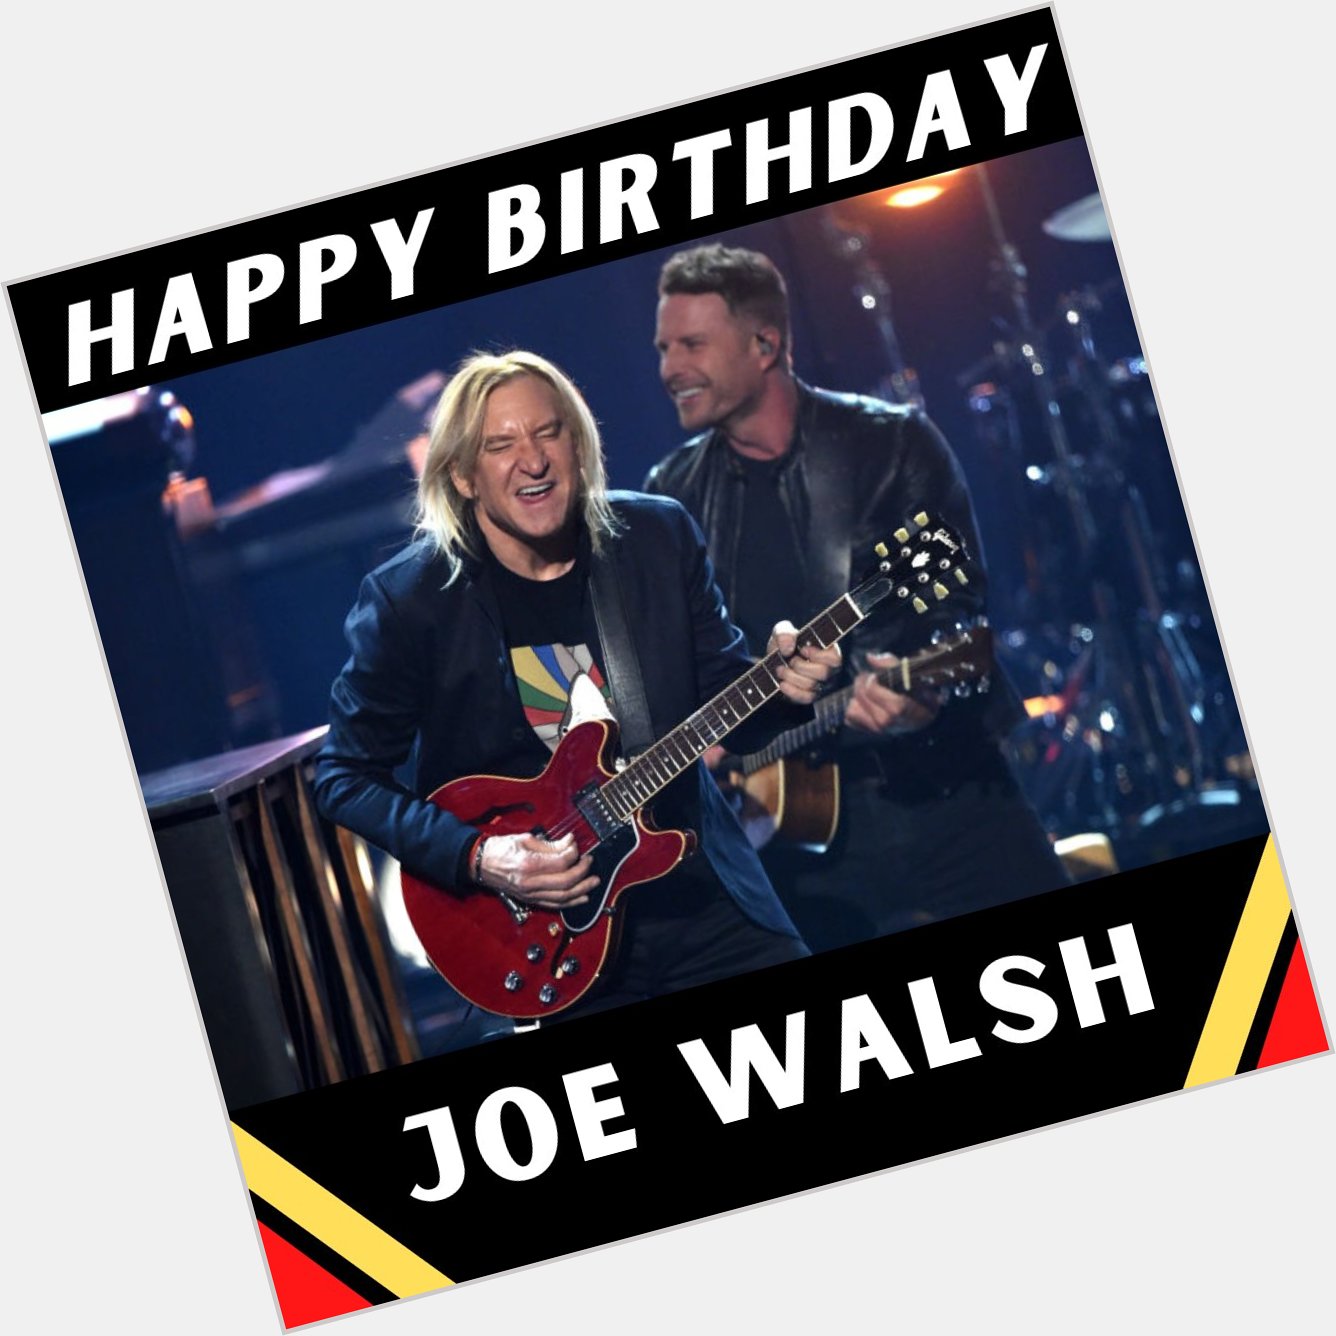 Wishing happy birthday to long-time Eagles guitarist Joe Walsh Photo by Scott Gries/Getty Images 